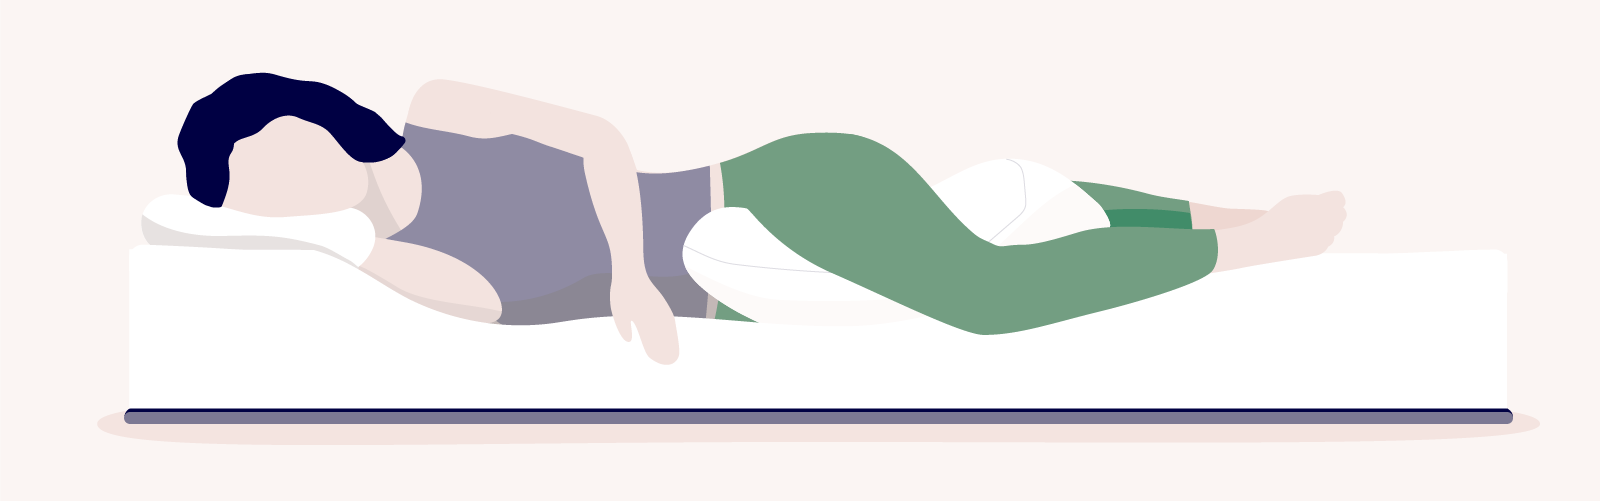 best sleeping position for peripheral artery disease illustration of woman lying on her side on a mattress with a pillow beneath her knees